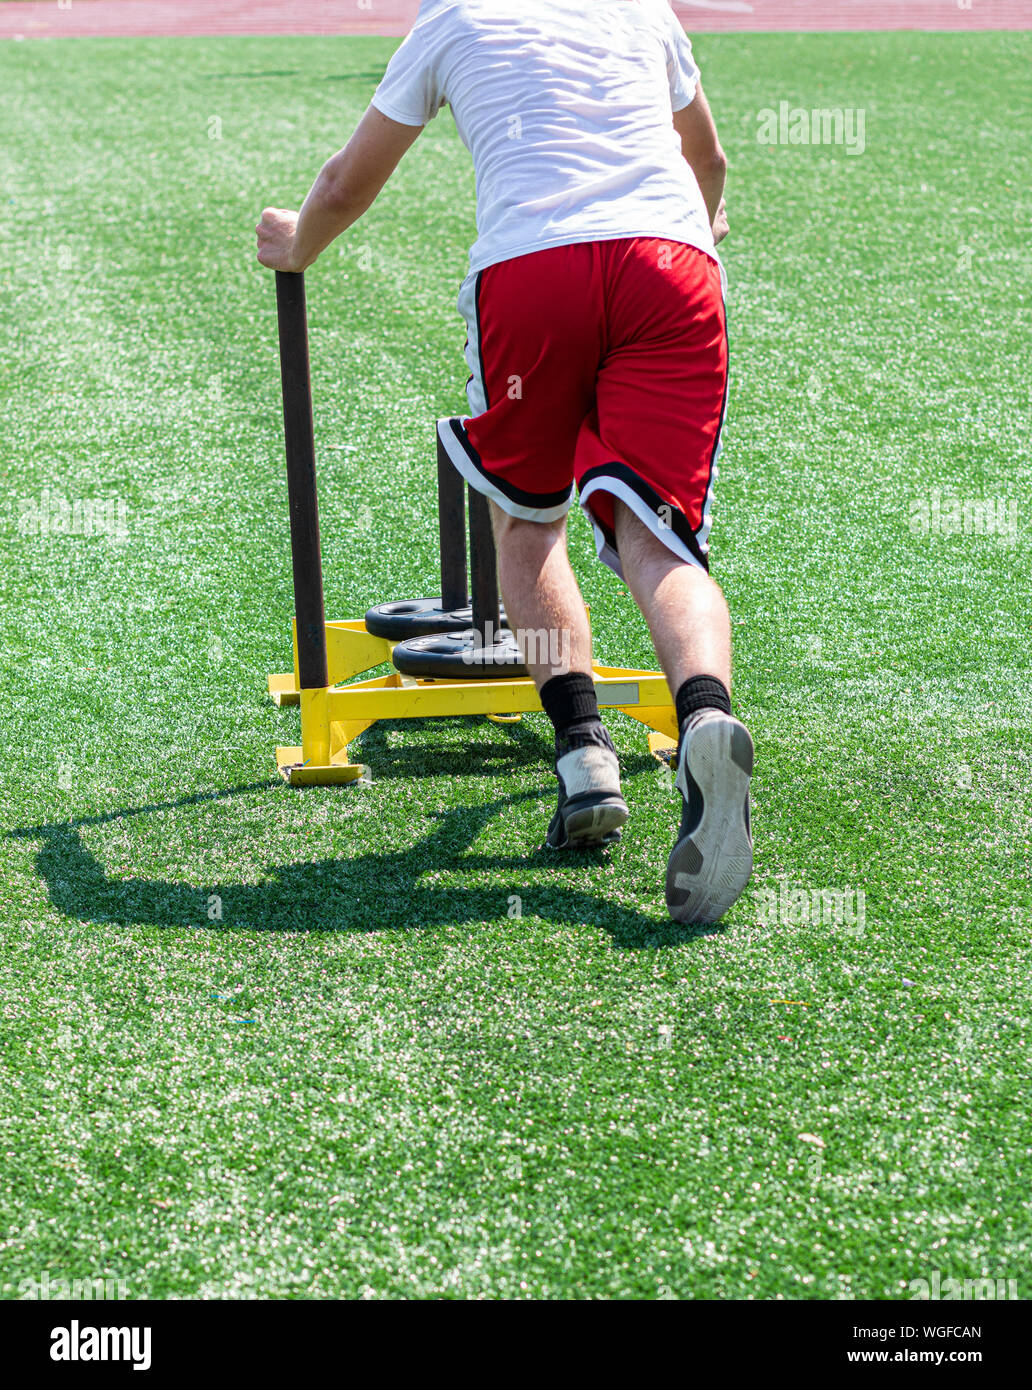 A teenage boy is pushing a yellow sled with weights on it during running camp on a green turf field. Stock Photo